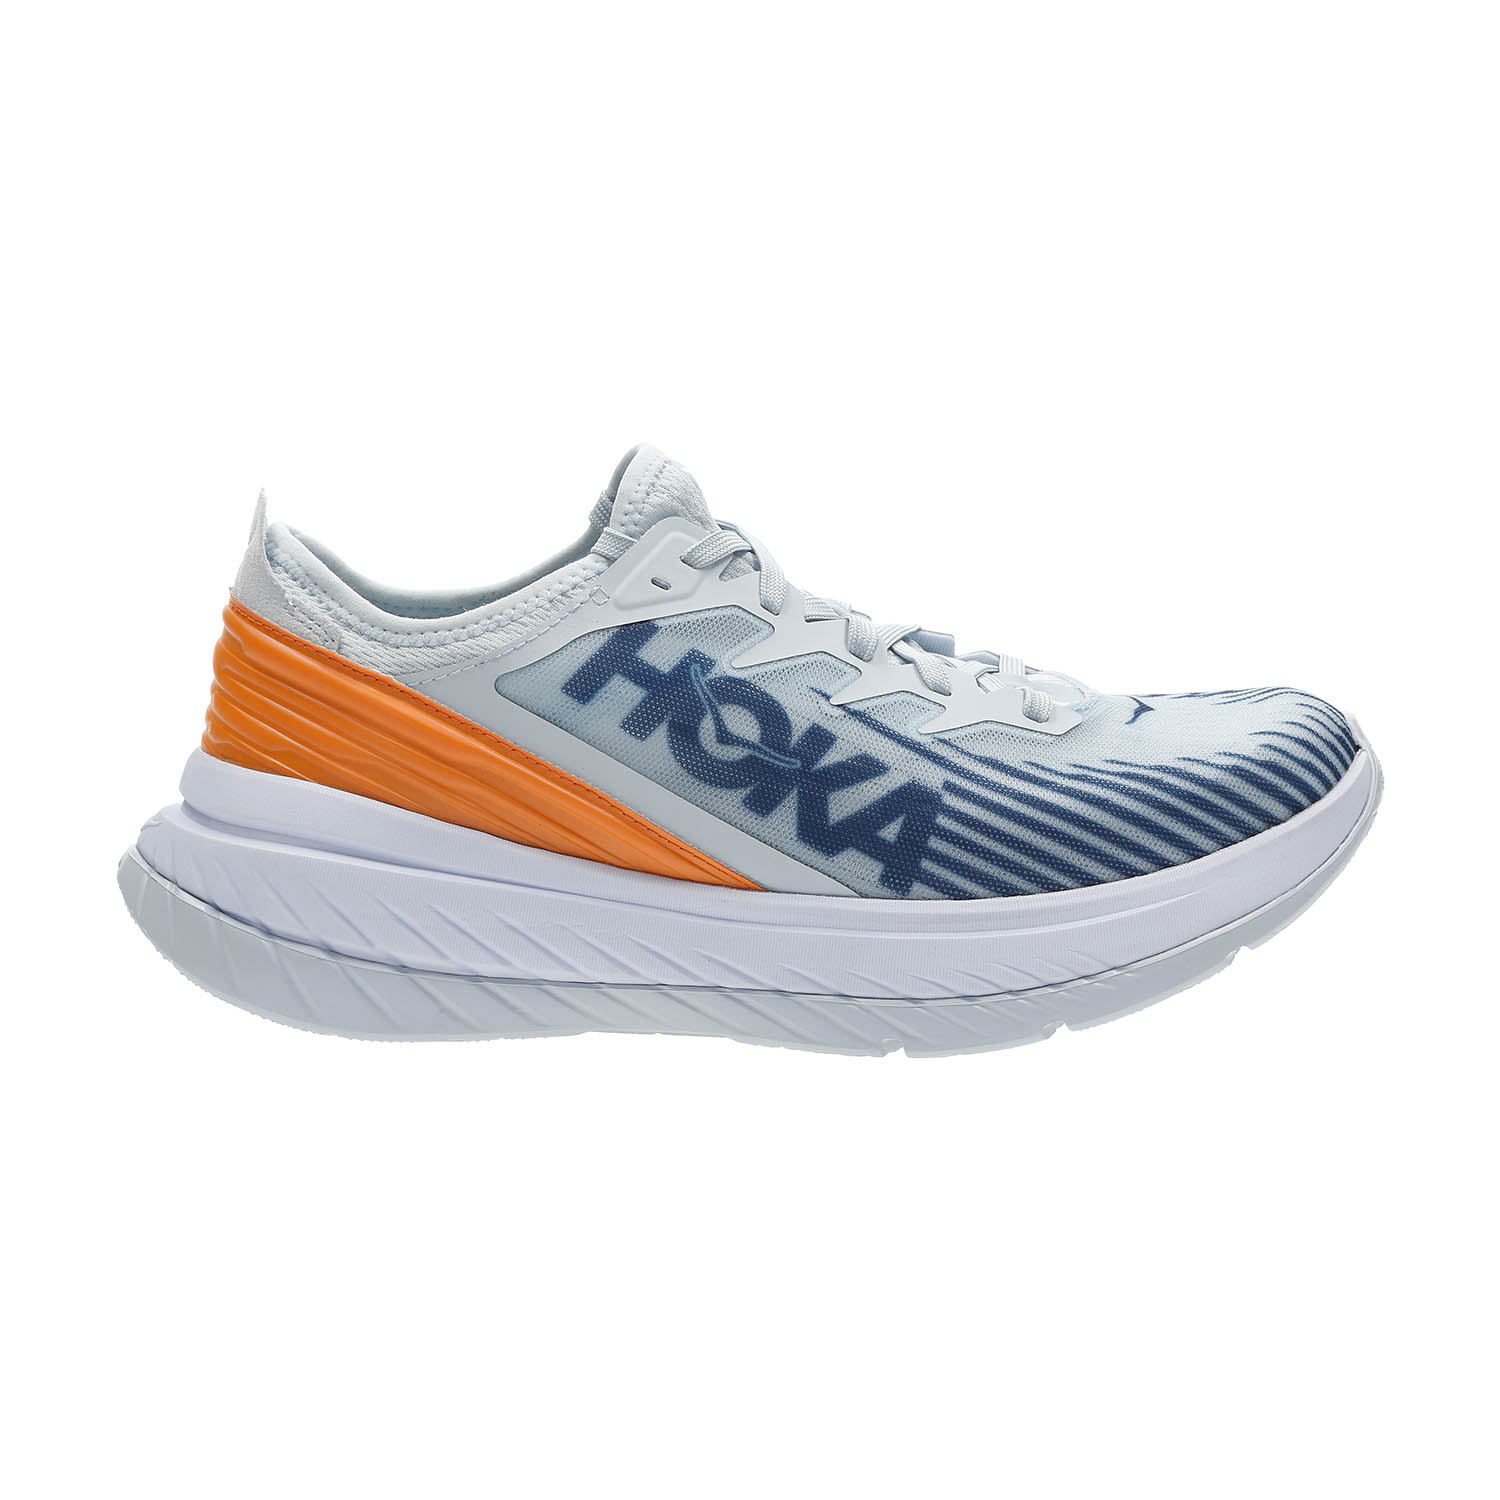 Hoka One One Carbon X-SPE Running Shoes 